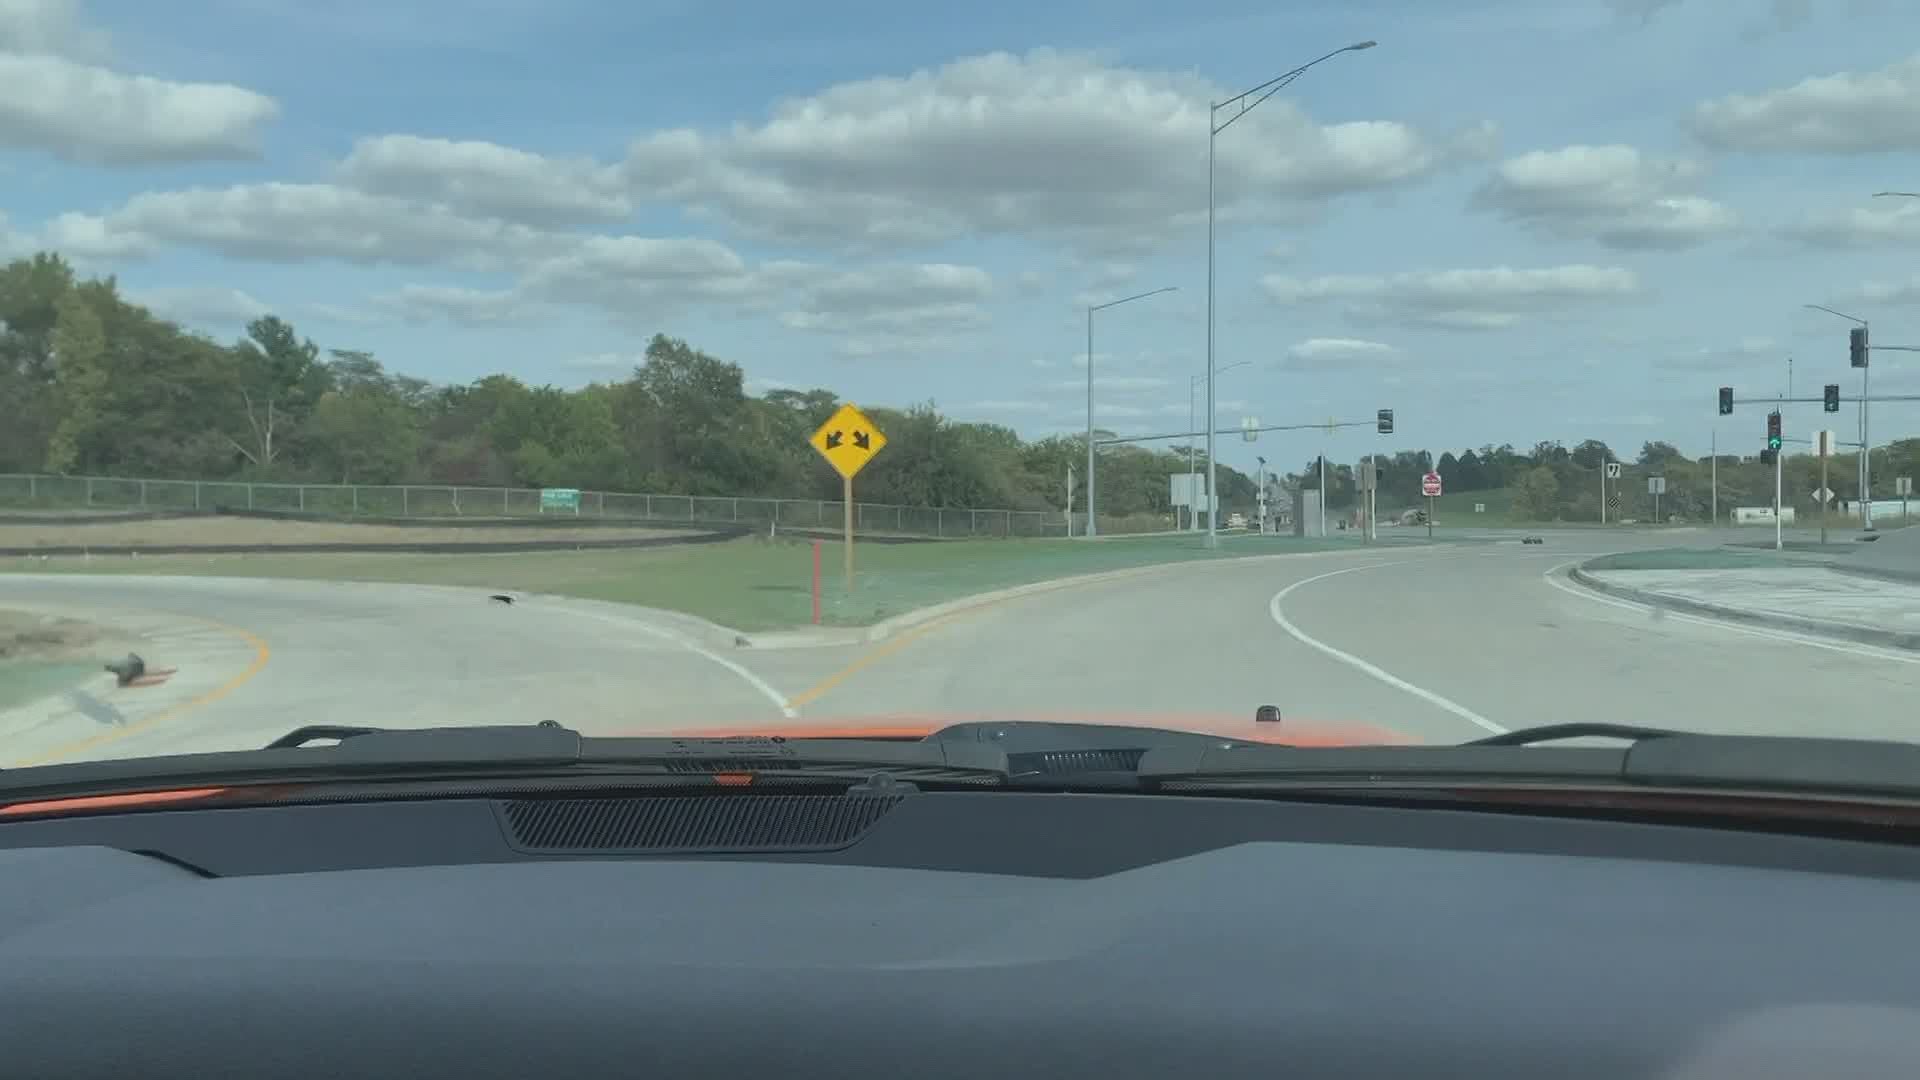 The intersection called the 'Diverging Diamond' will allow for a safer entrance on northbound I-35 without crossing into oncoming traffic.